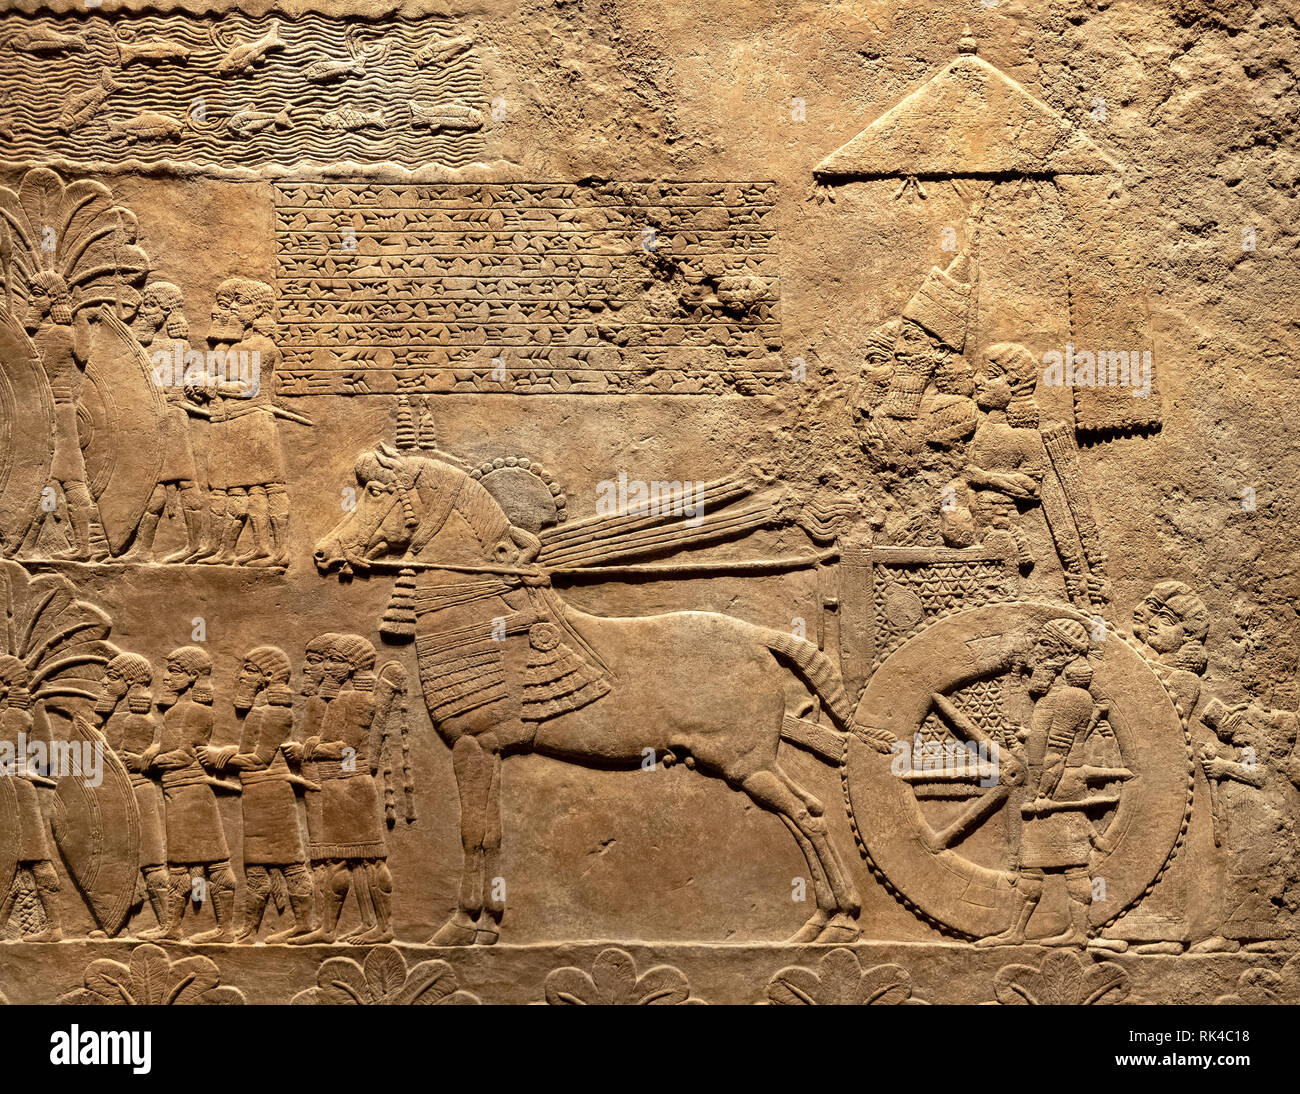 London, England / United Kingdom - 2019/01/28: Ancient Assyria clay tablet relief of king Ashurbanipal inspecting booty and prisoners from conquered B Stock Photo